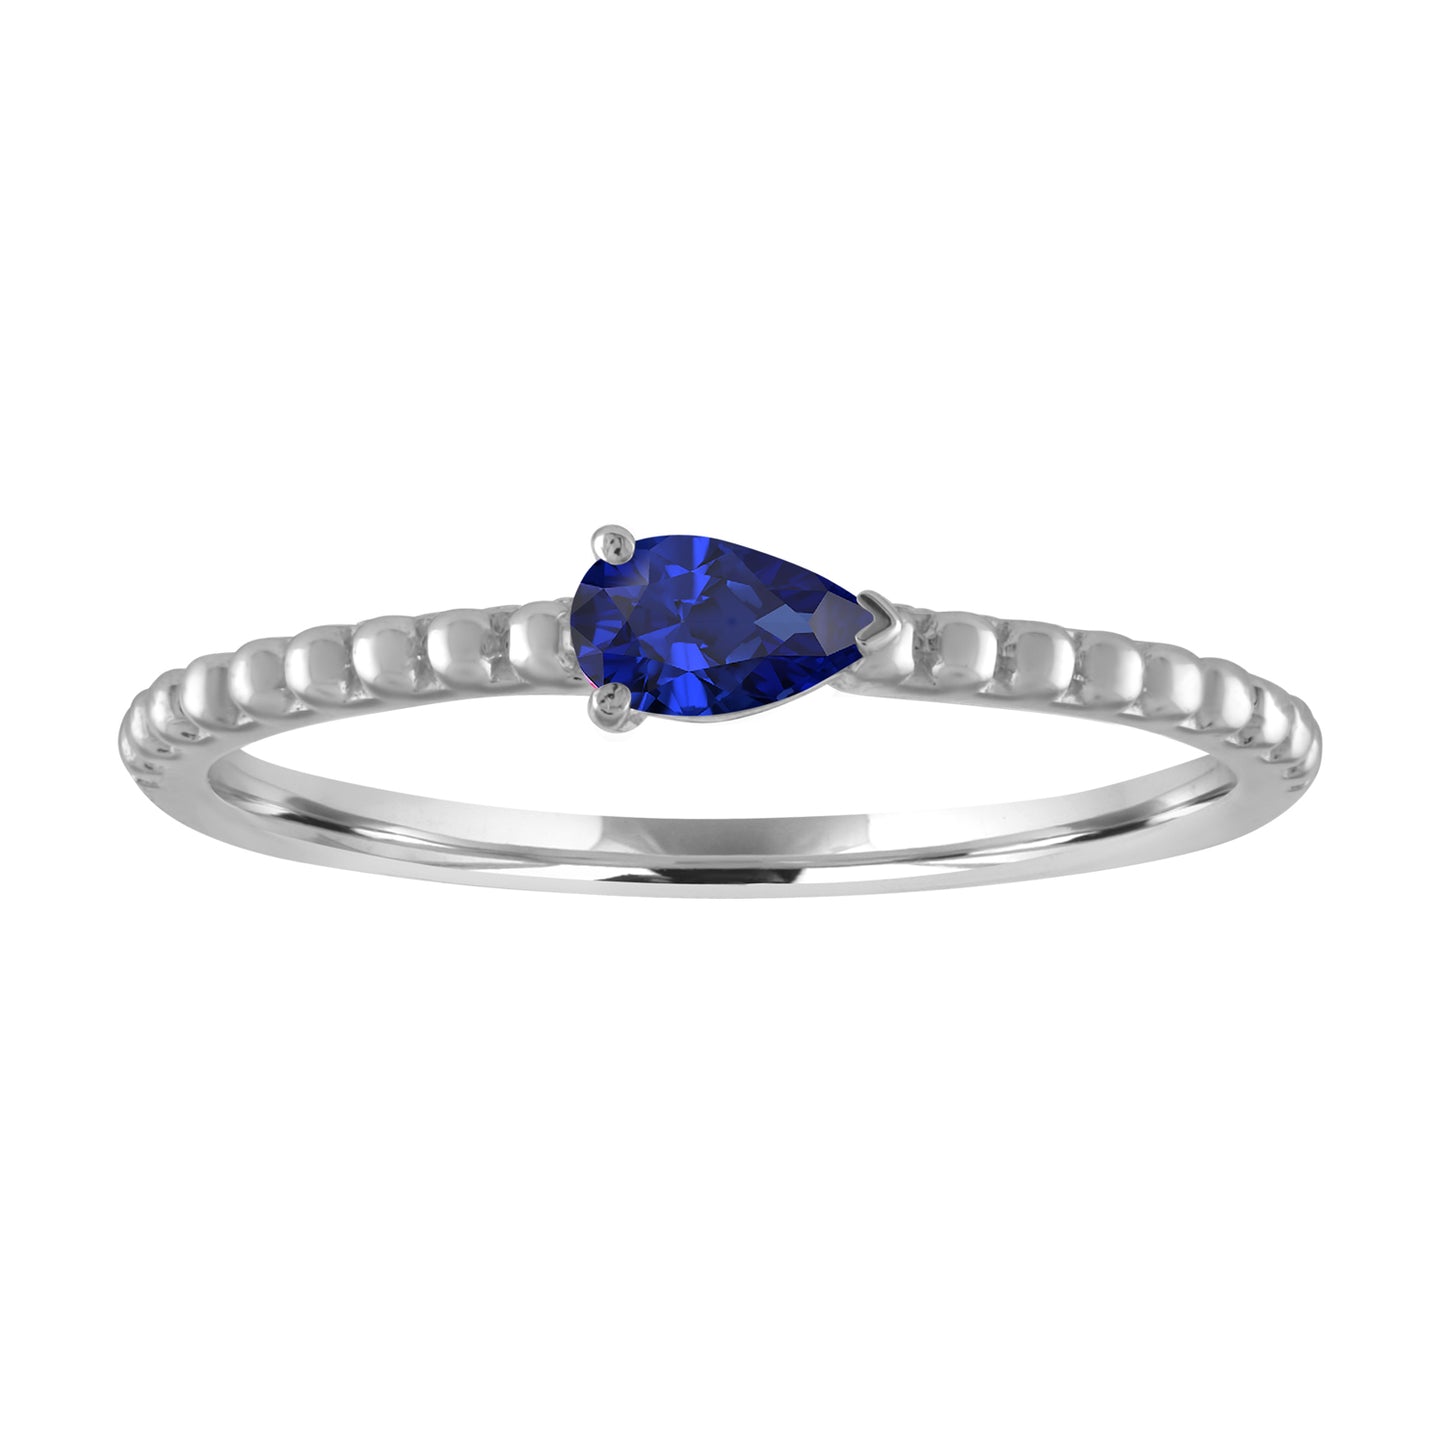 White gold beaded skinny band with a pear shaped sapphire in the center. 